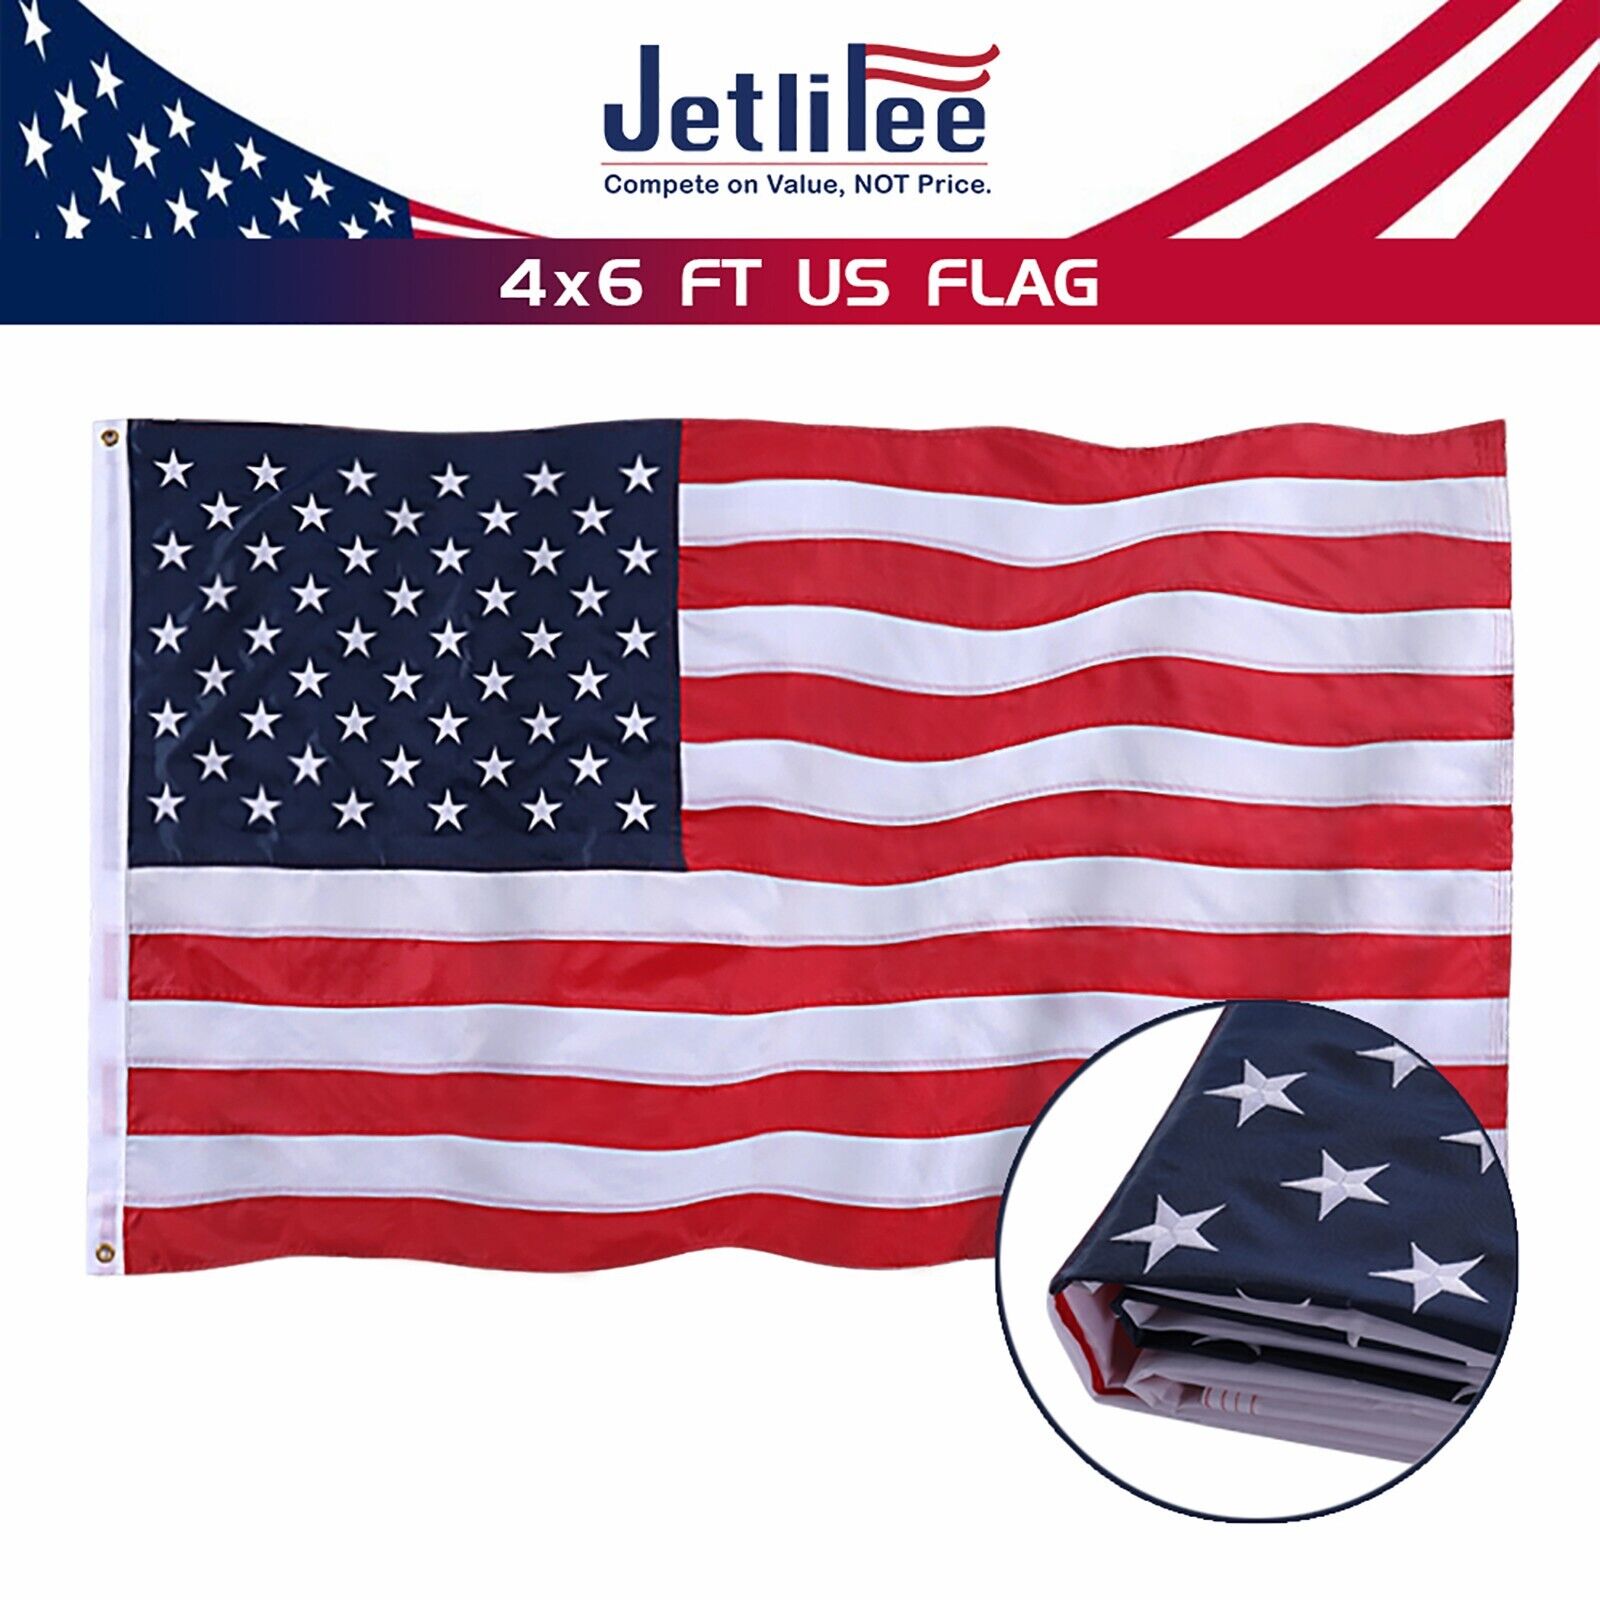 Jetlifee 4x6 FT USA US American Flag Heavy Duty 210D Polyester Double Embrodered